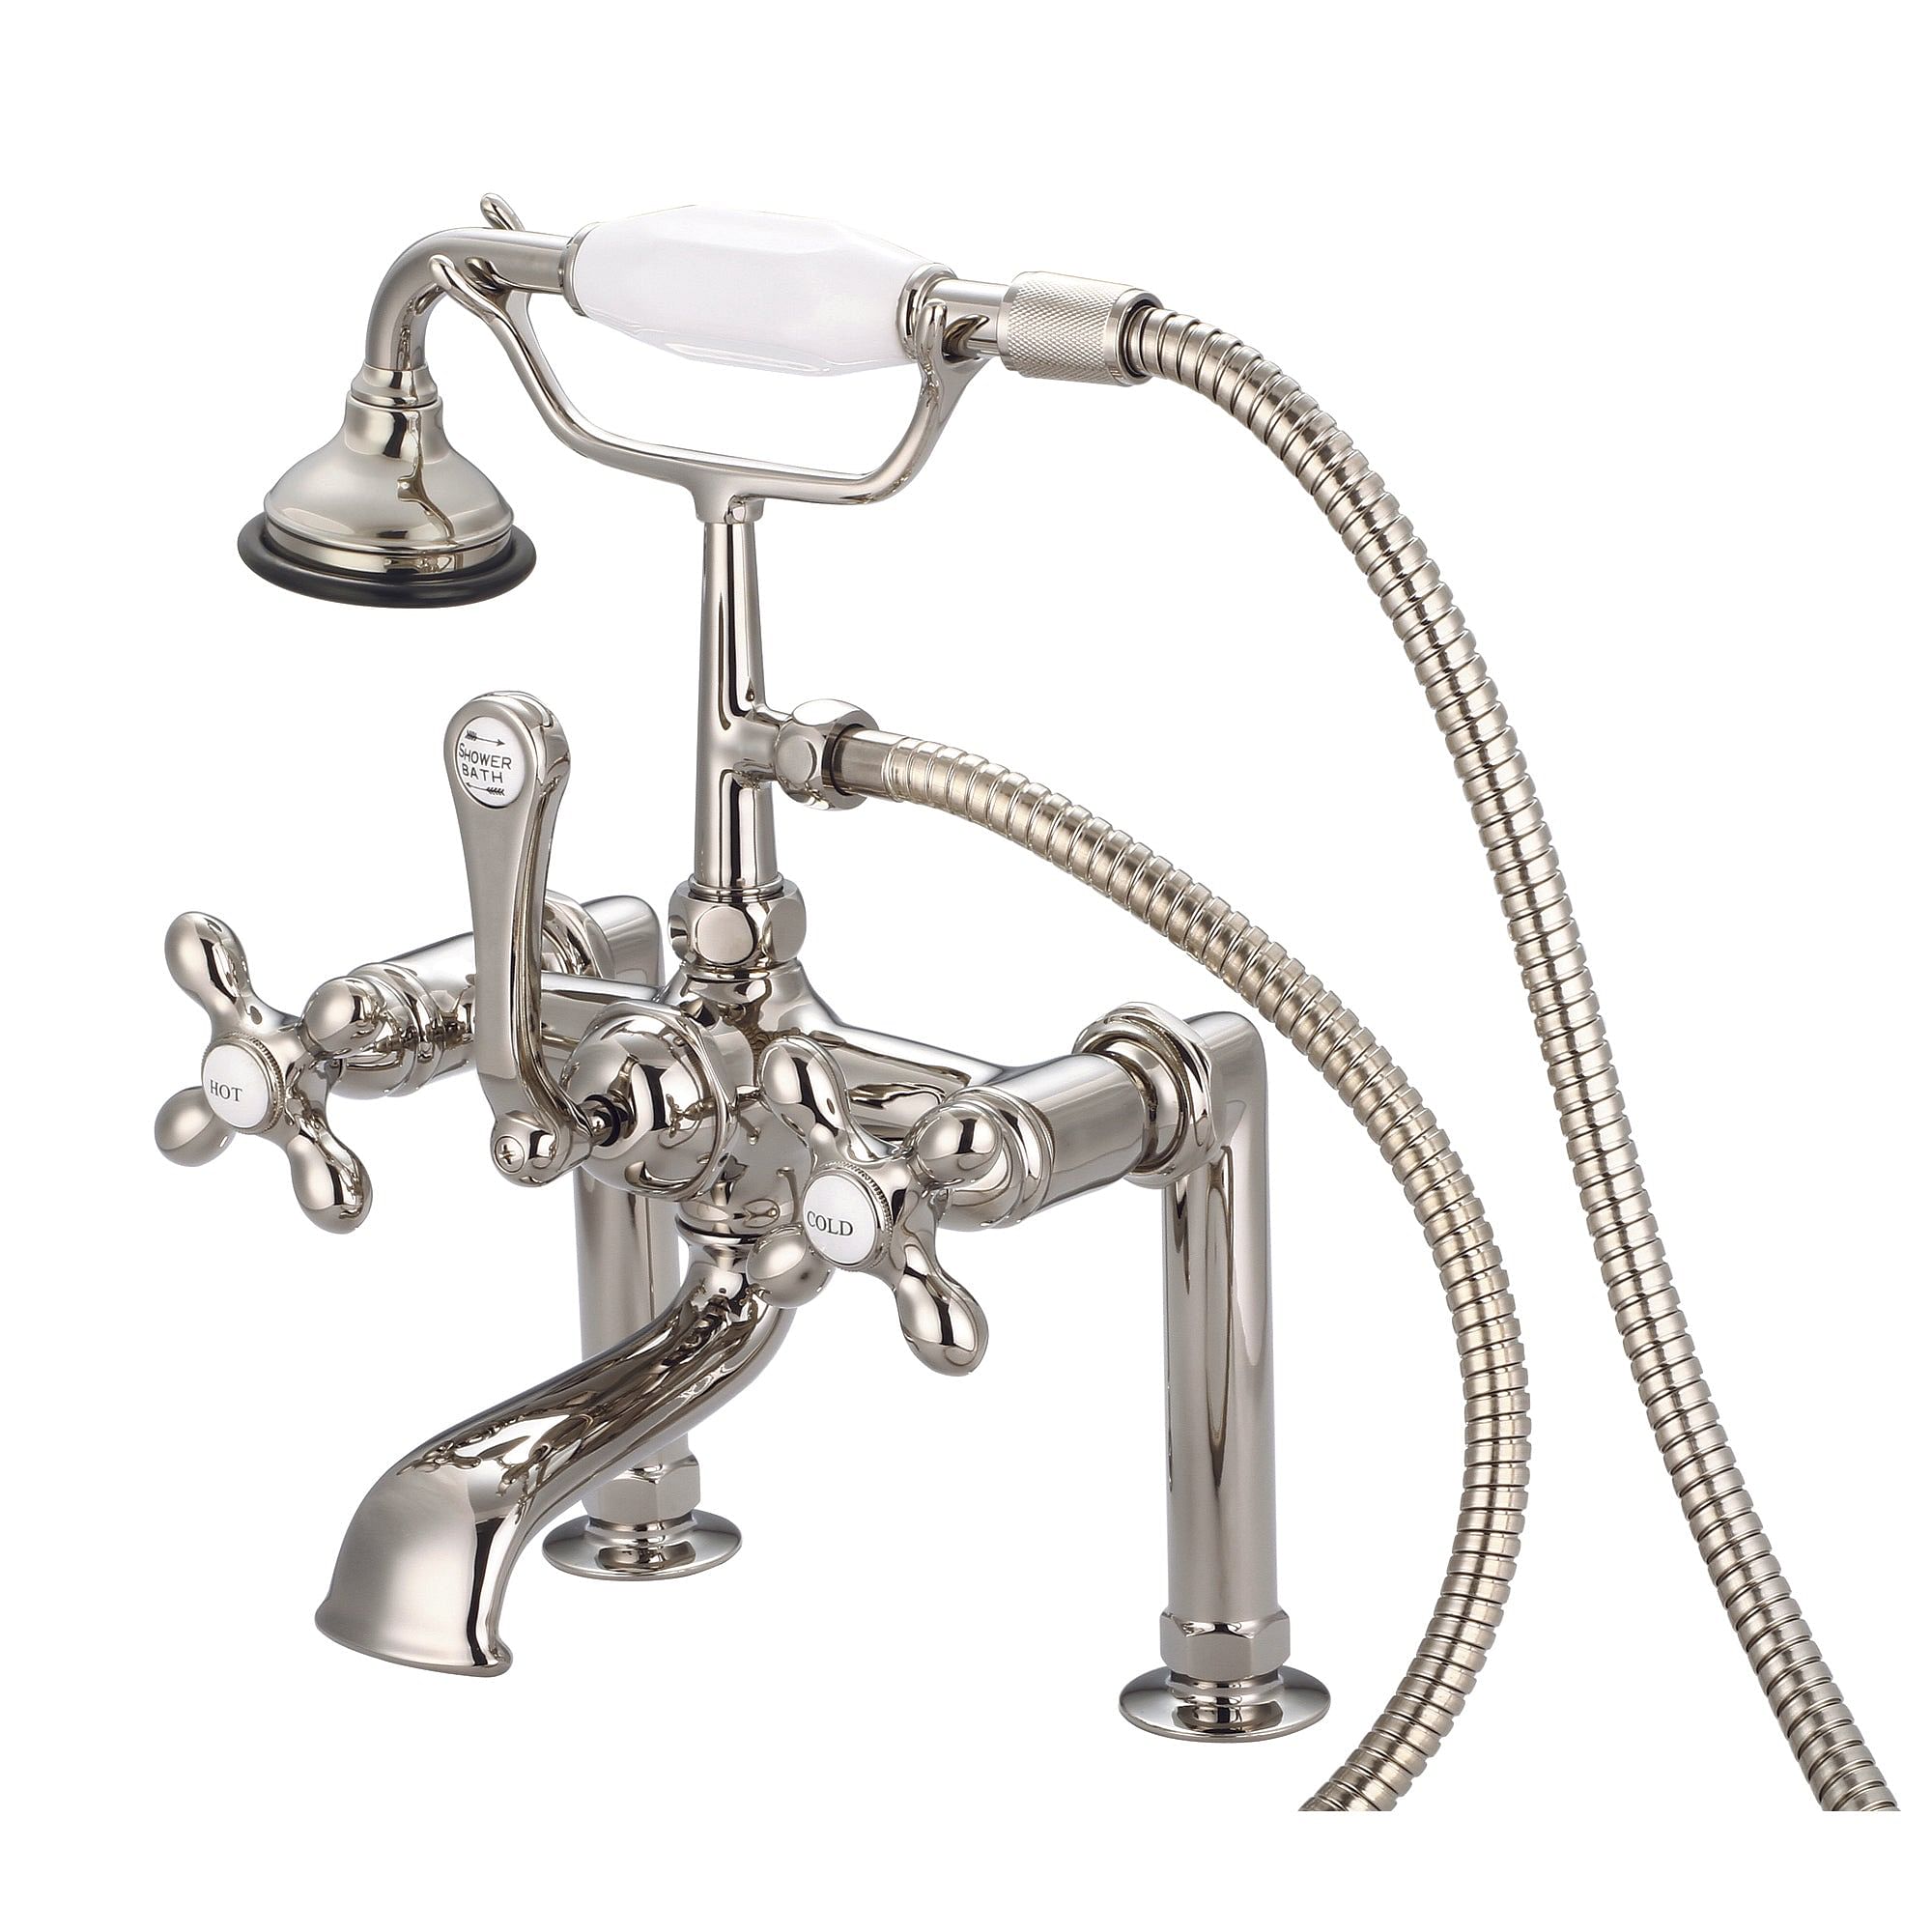 Vintage Classic 7 Inch Spread Deck Mount Tub Faucet With 6 Inch Risers & Handheld Shower in Polished Nickel (PVD) Finish With Metal Lever Handles, Hot And Cold Labels Included